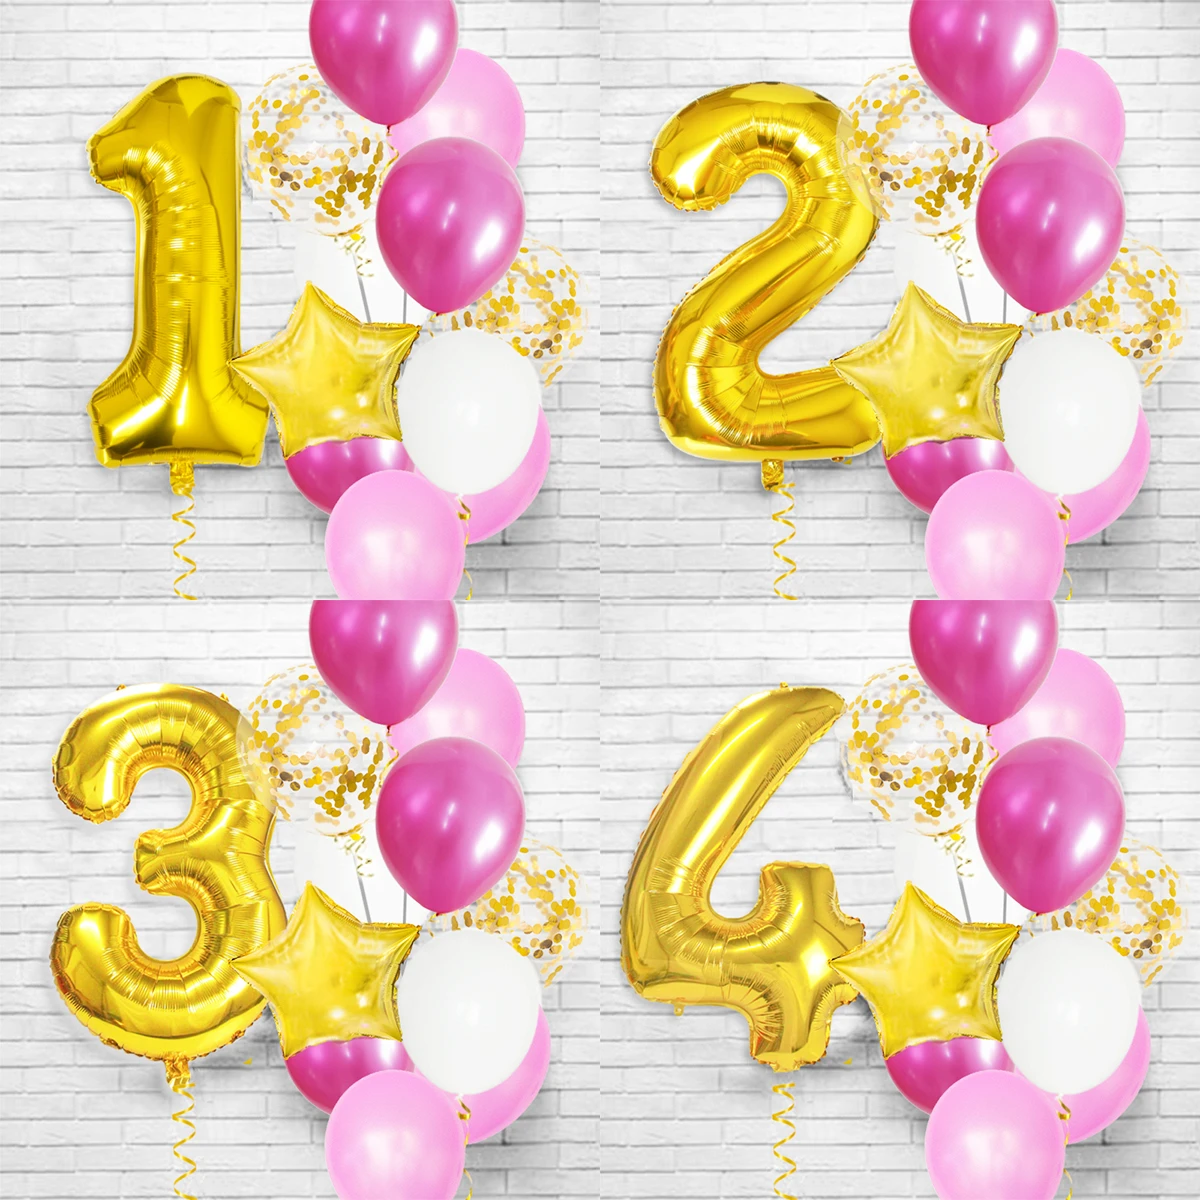 12pcs Number Foil Balloons Birthday Party Decoration Kids Baby Girl Princess 1 2 3 4 5 6 7 8 9 Years Old 1st Birthday Latex Ball